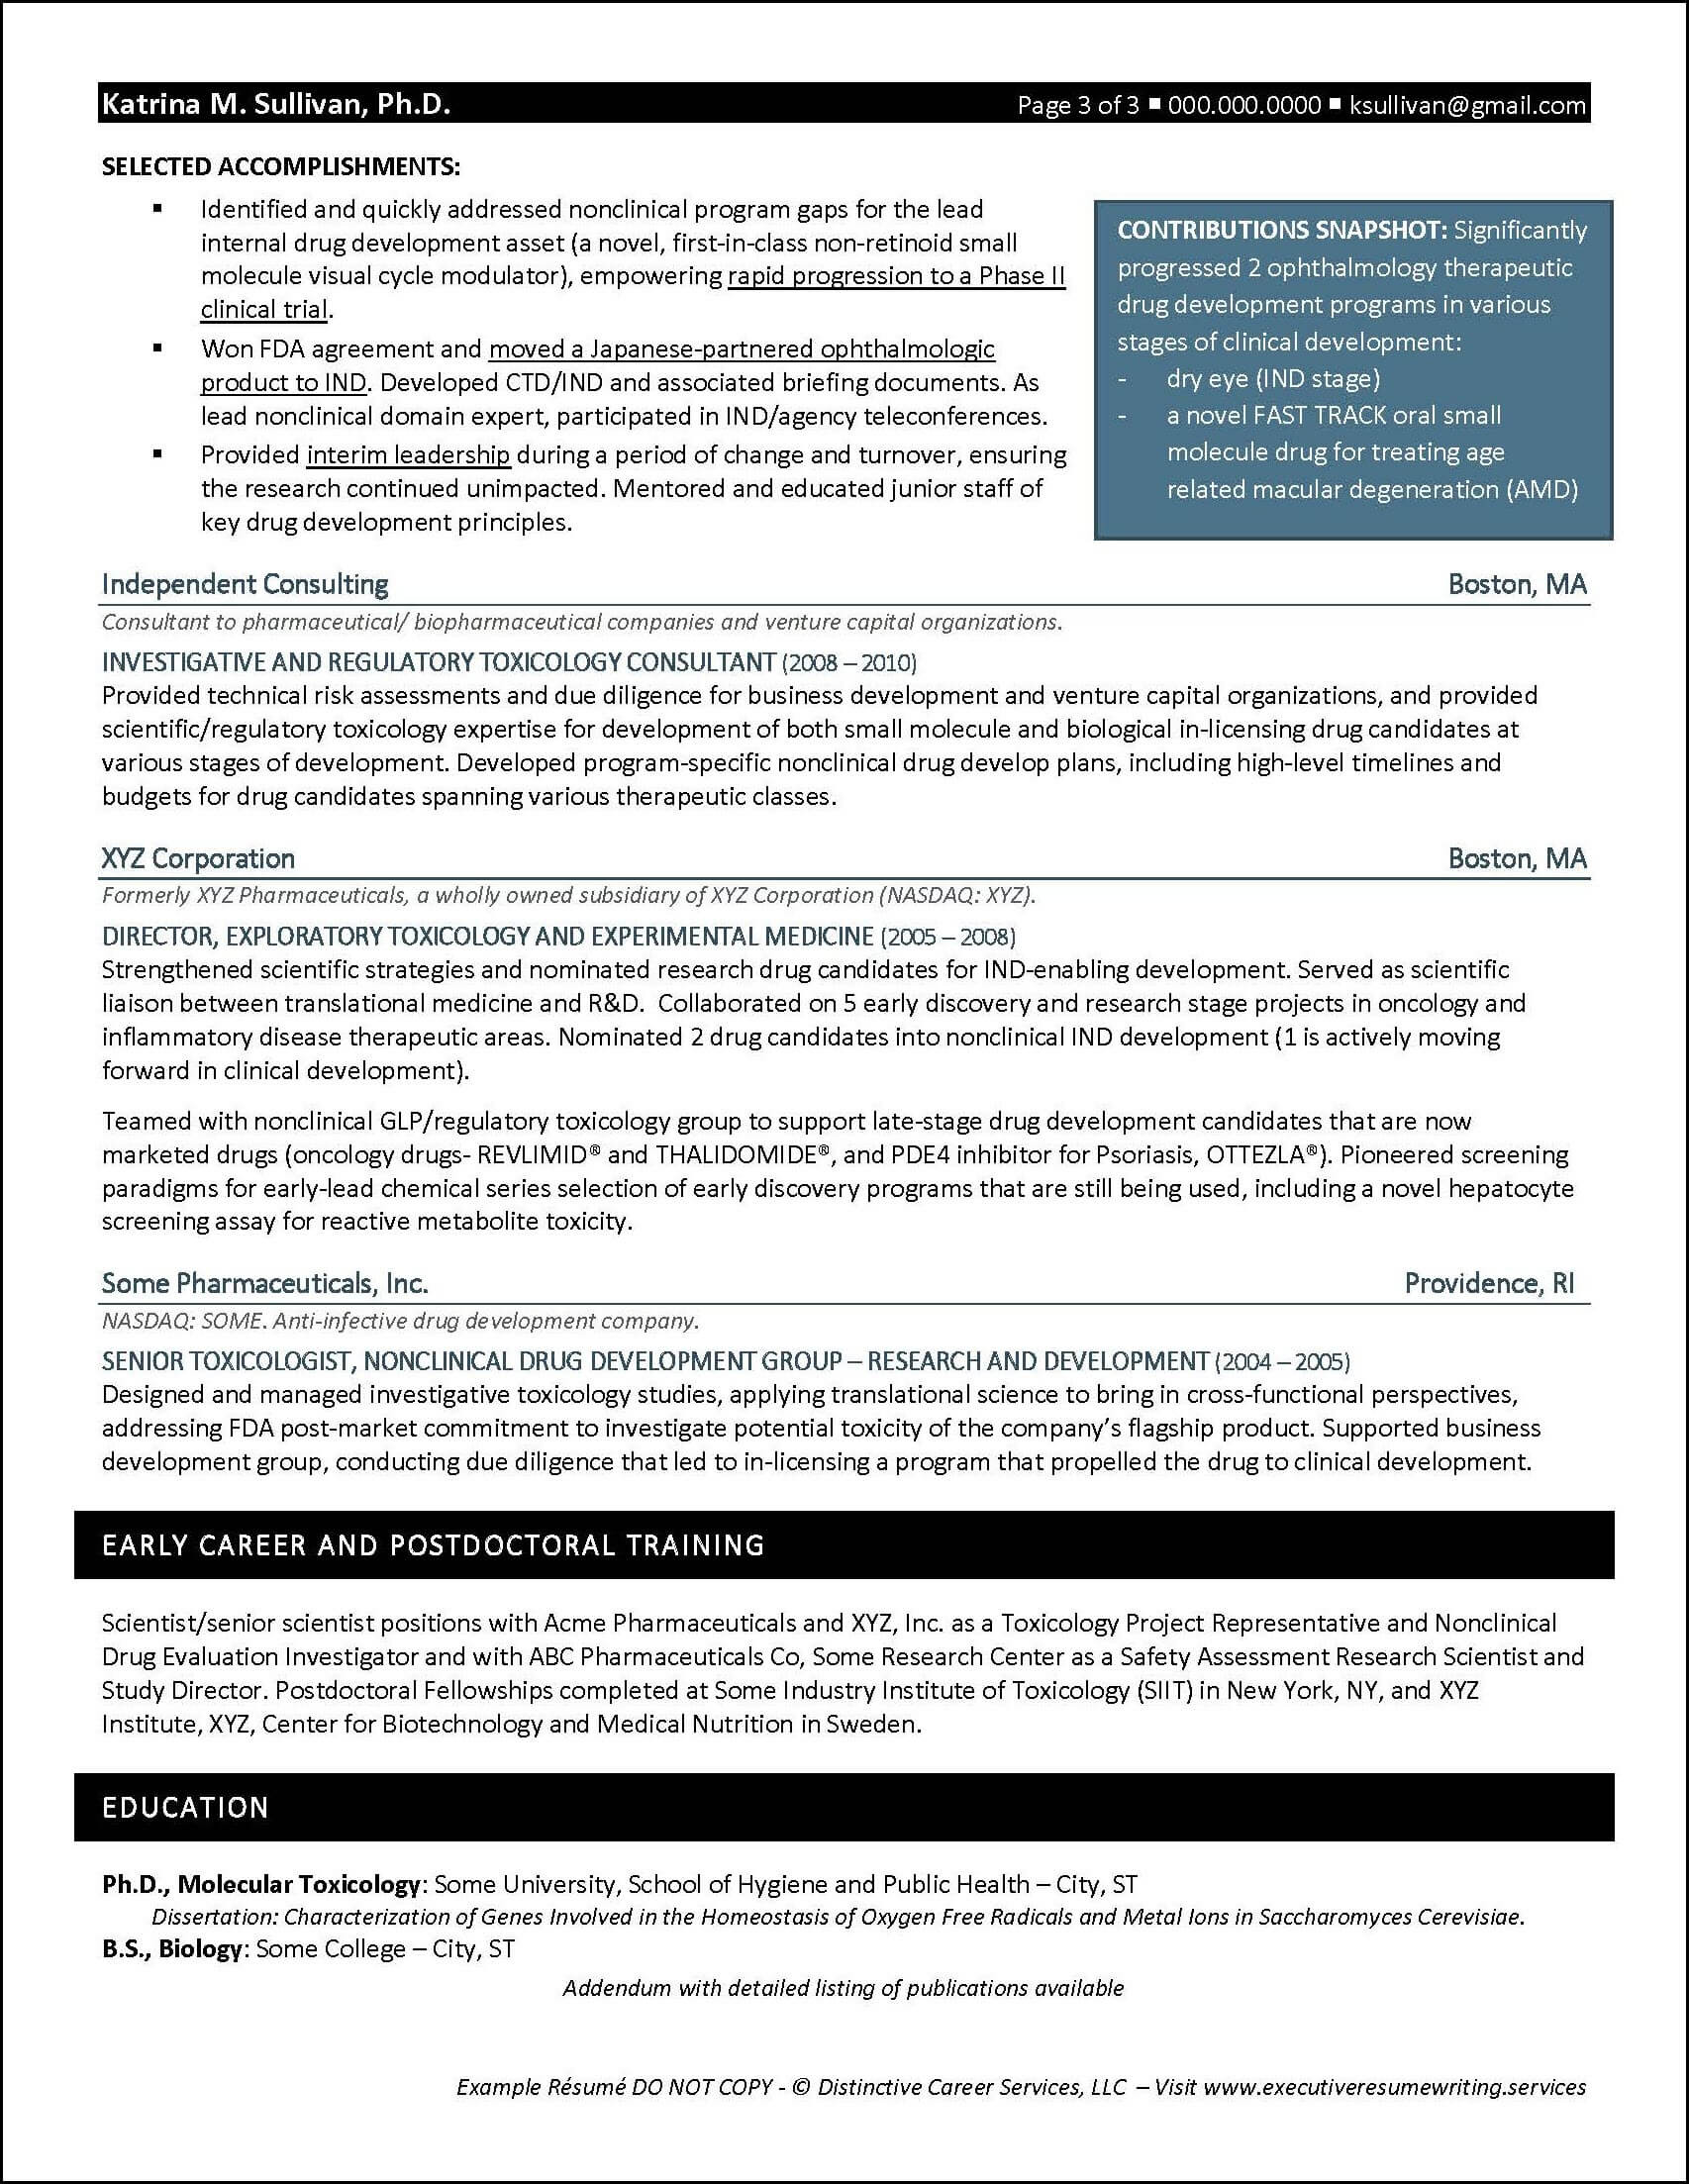 Research and Development Due Diligence Vice President Sample Resume Example Executive Resumes & Other Career Marketing Documents